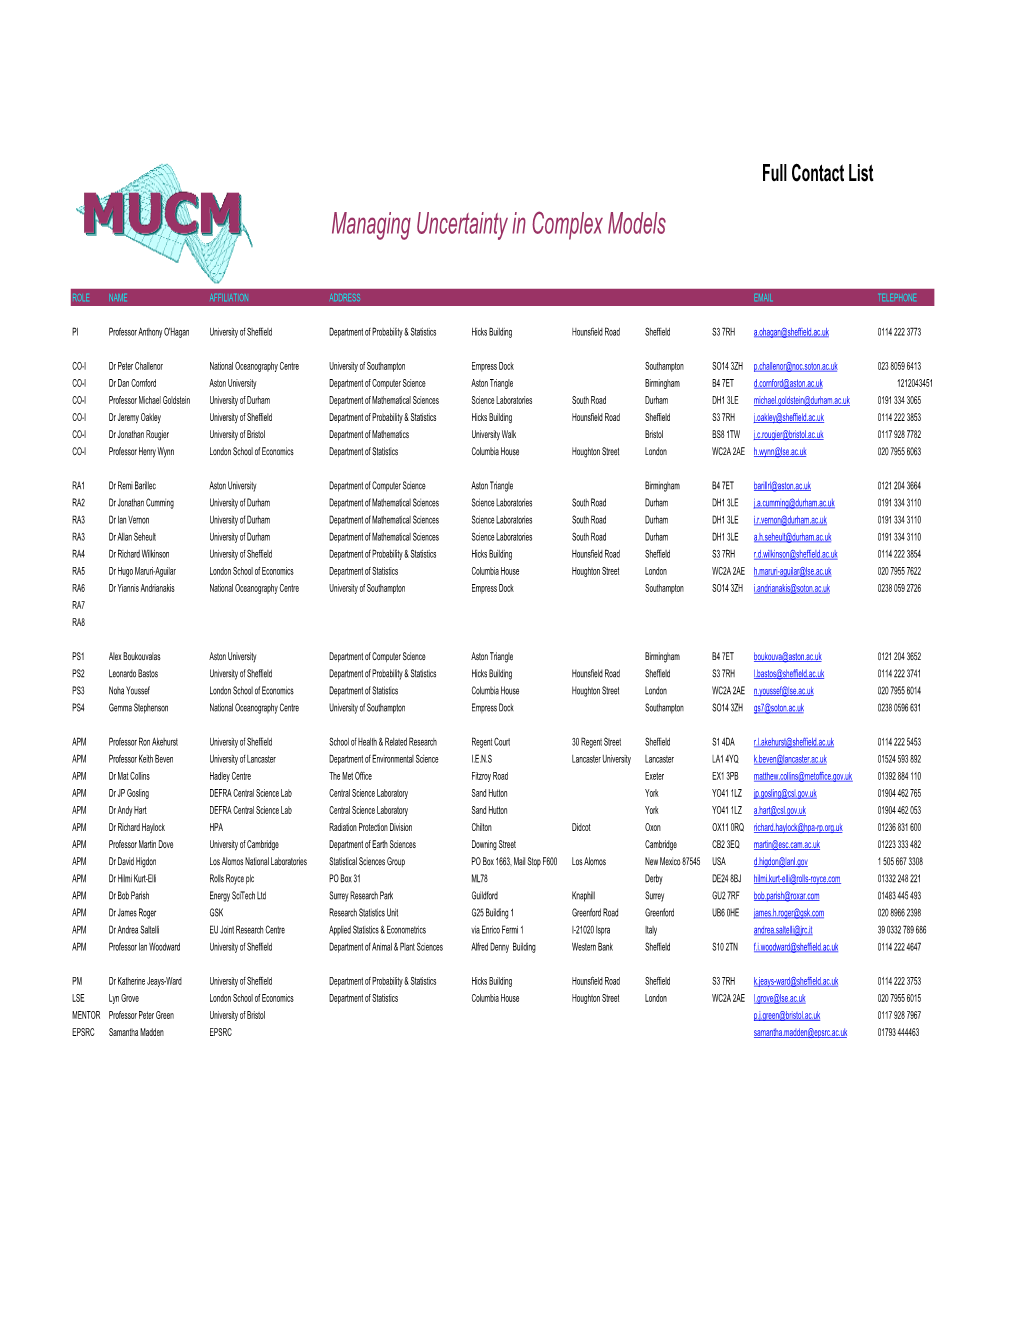 MUCM Full Contact List Updated 10.12.8